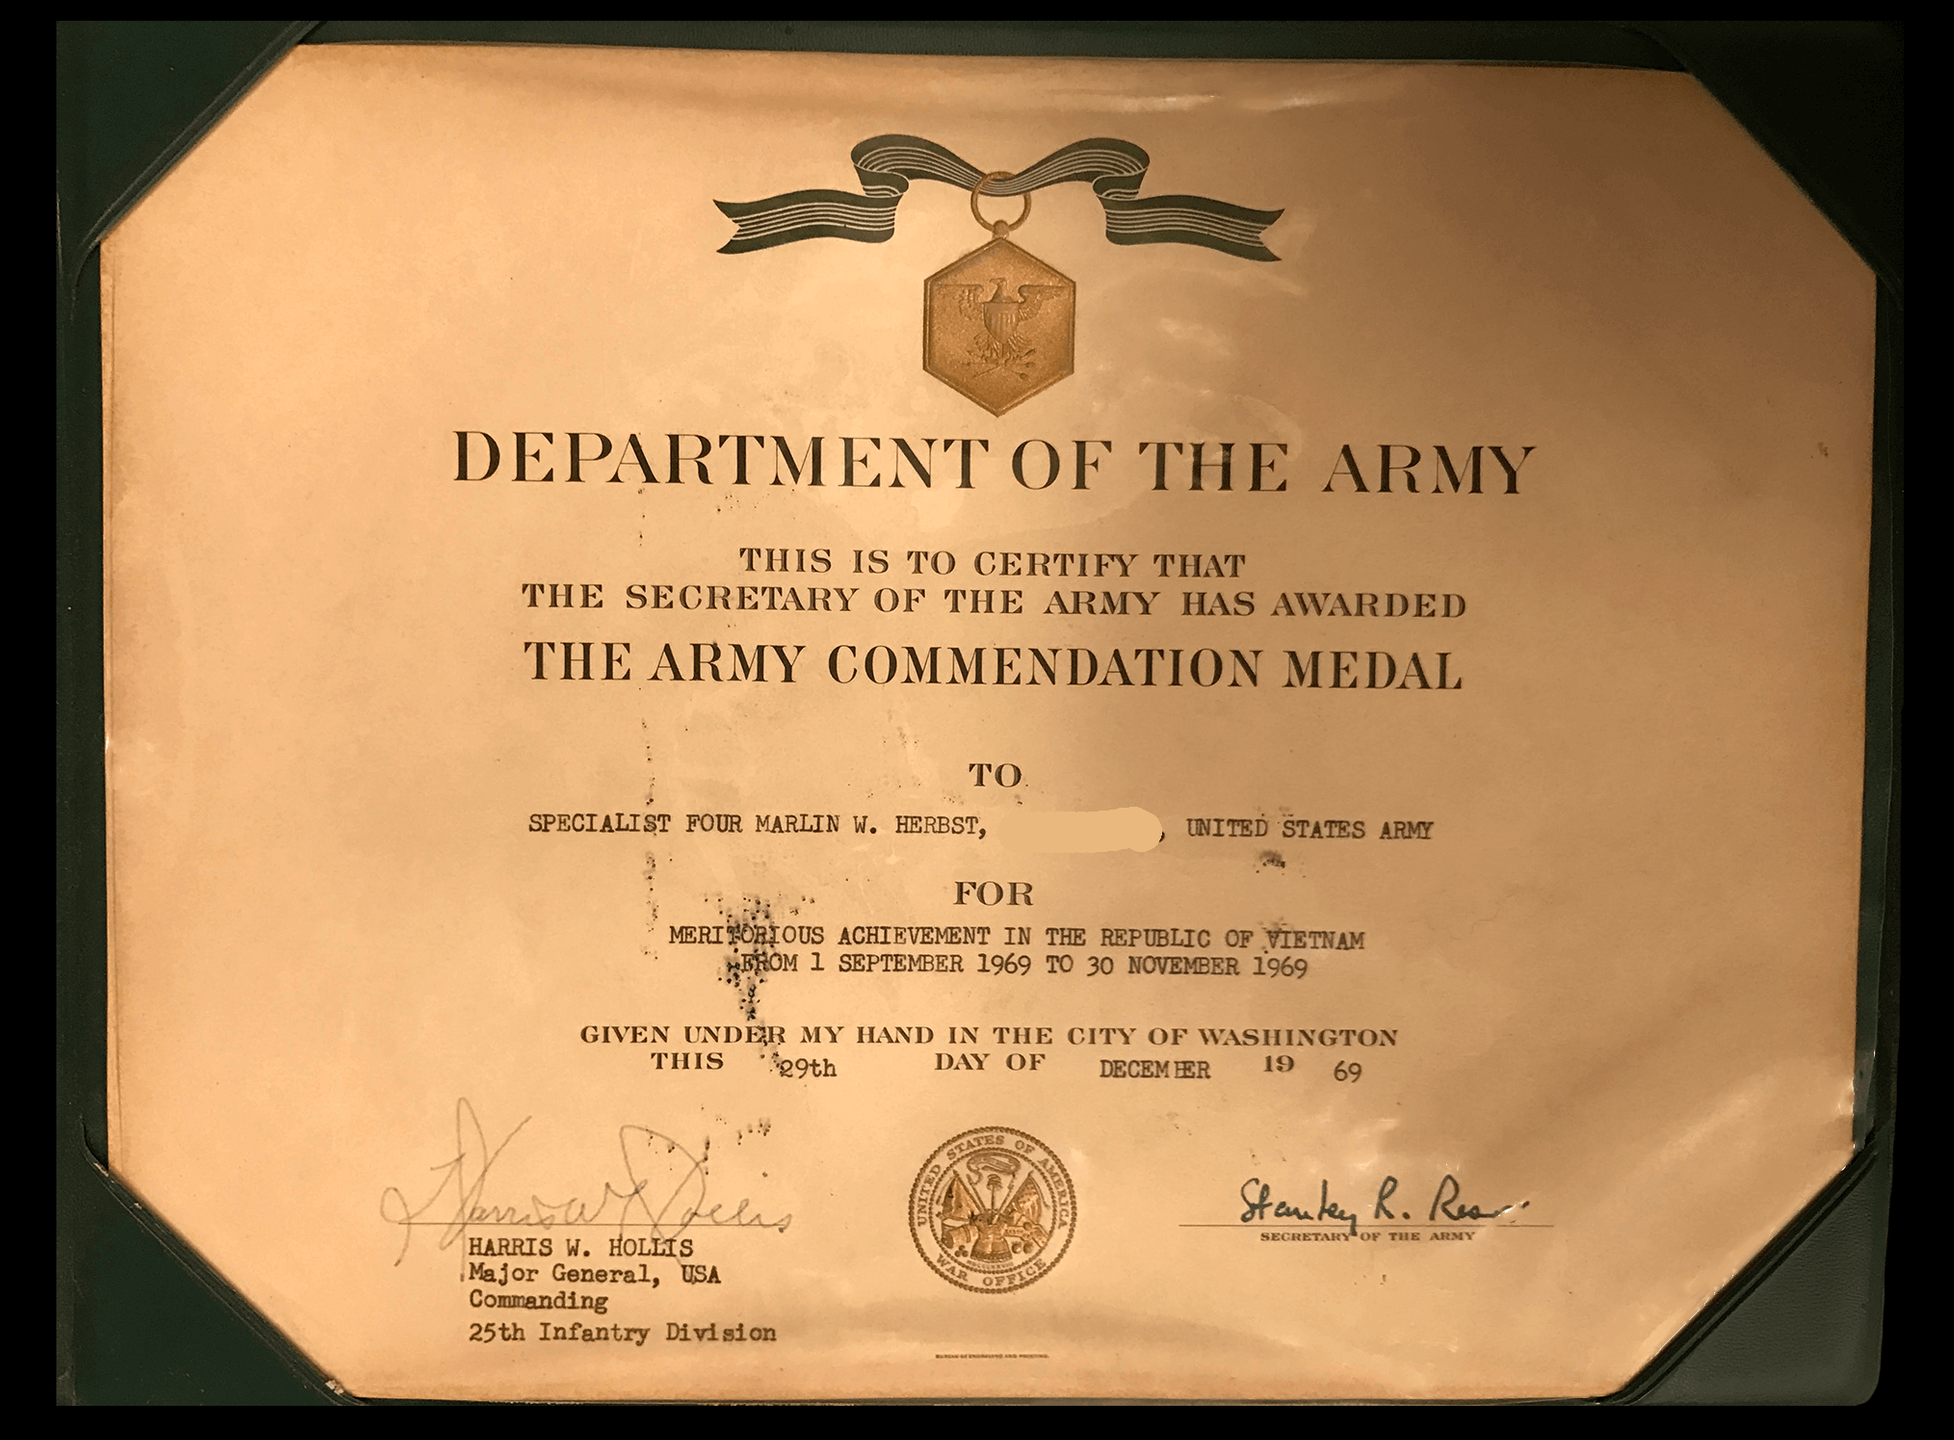 Certificate for an Army Commendation Medal, presented to Marlin Herbst for the period of 9-1-1969 through 11-30-1969.